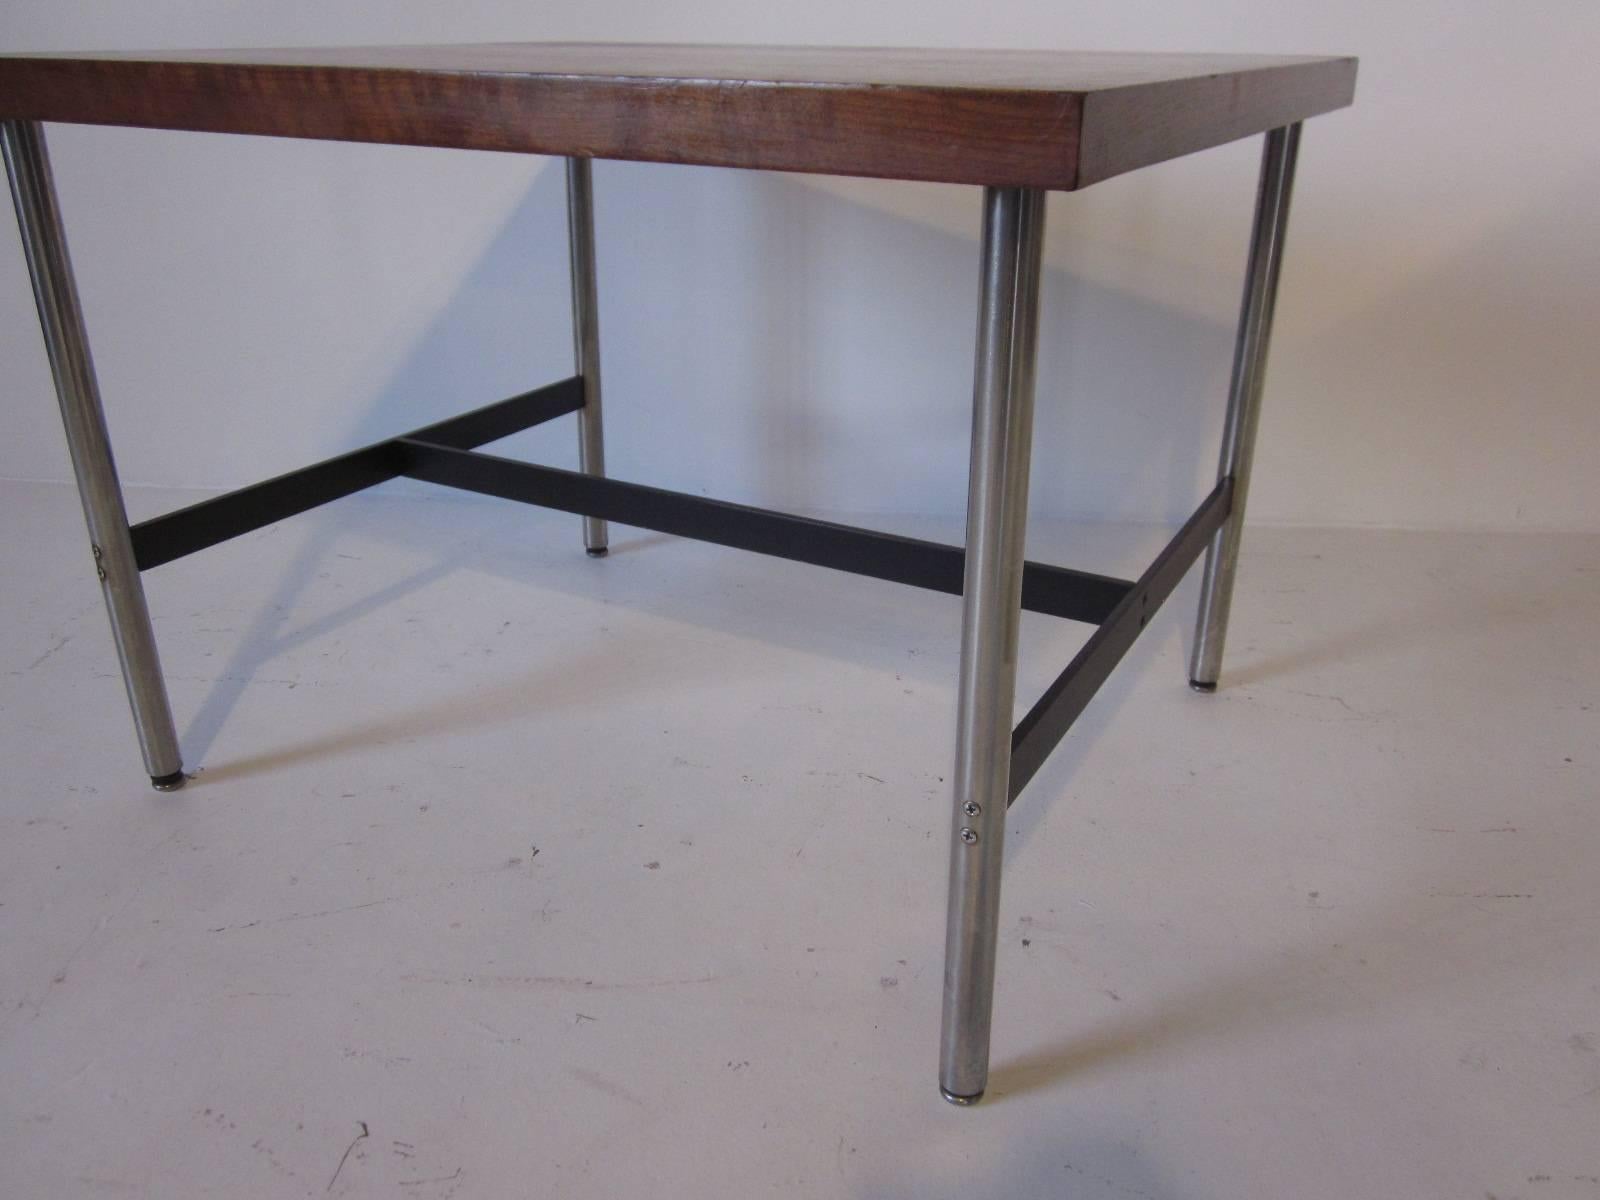 A hard to find Nelson walnut topped side table with brushed stainless steel legs and satin black metal stretchers manufactured by the Herman Miller Furniture Company.